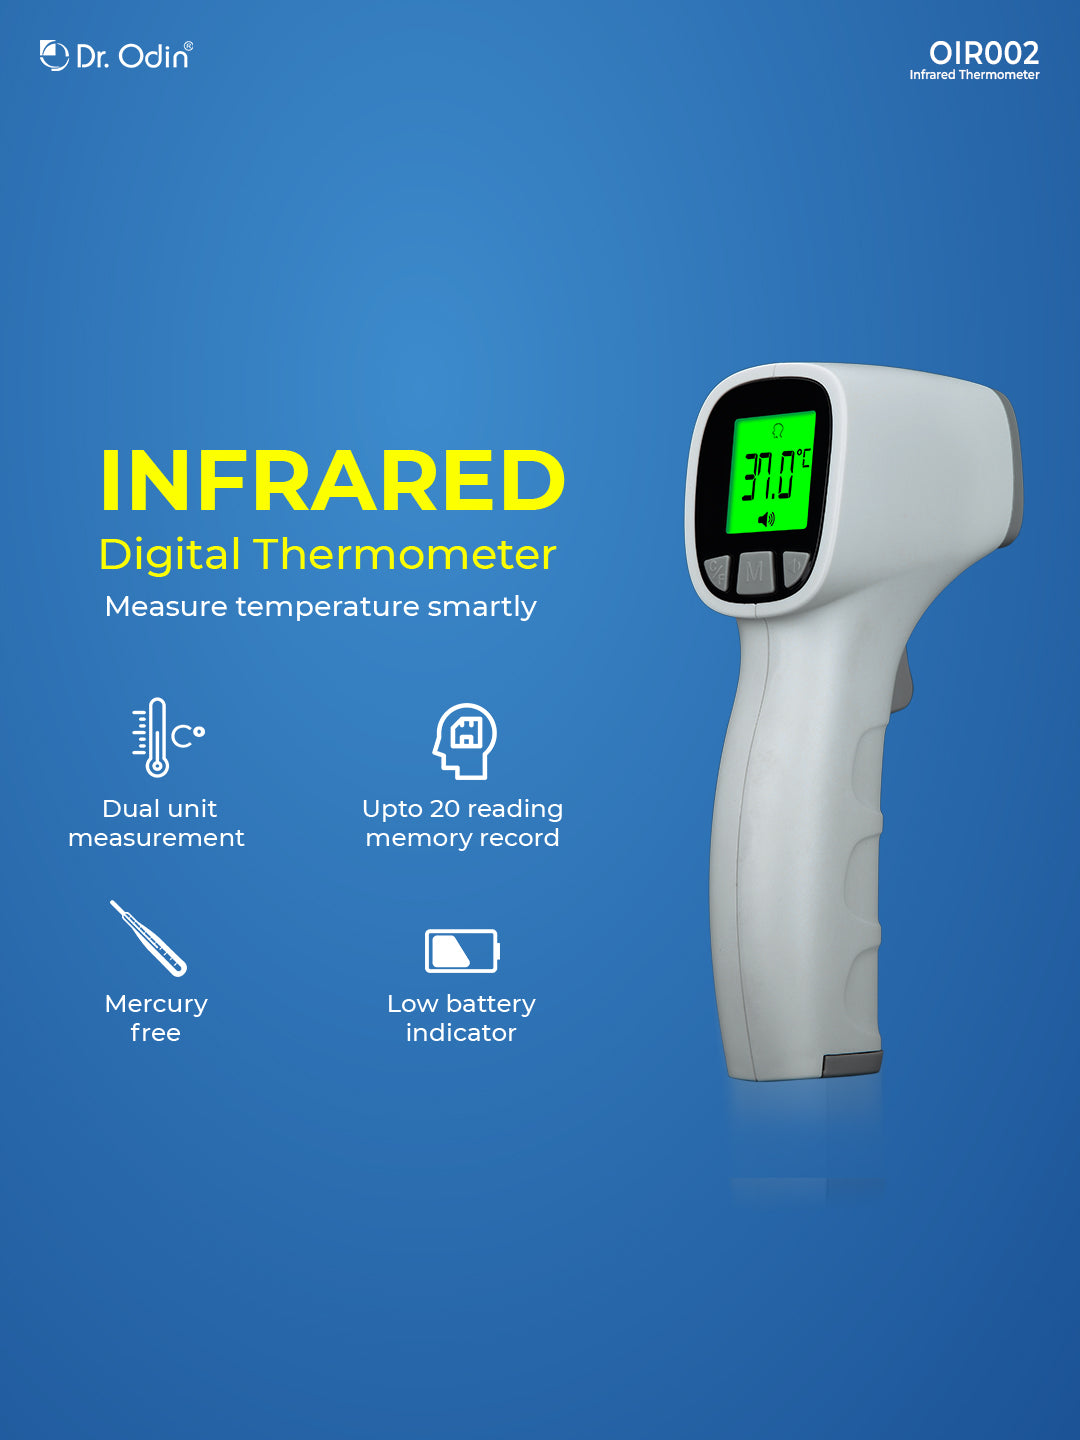 Infrared Thermometer OIR002